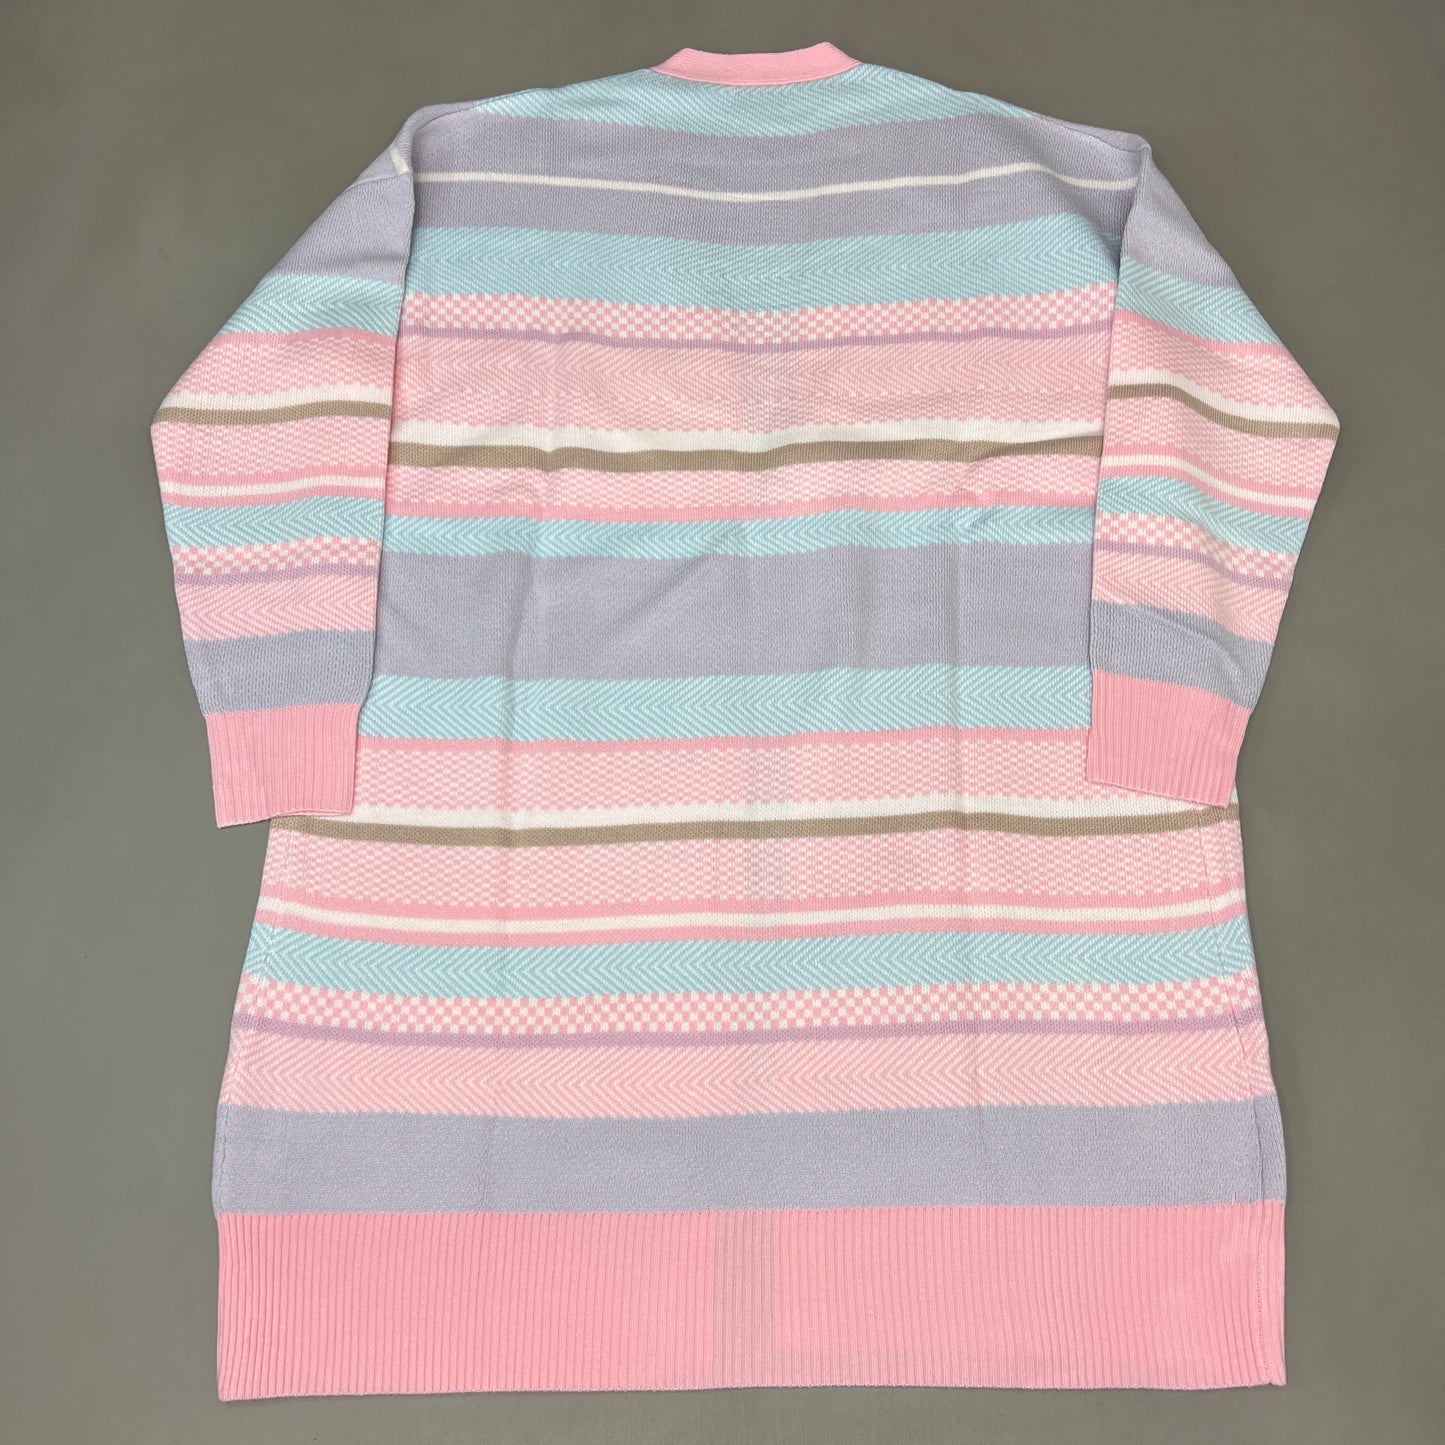 PINK LILY Multi-colored Striped Sweater Cardigan Women's Sz S PL930 (New)